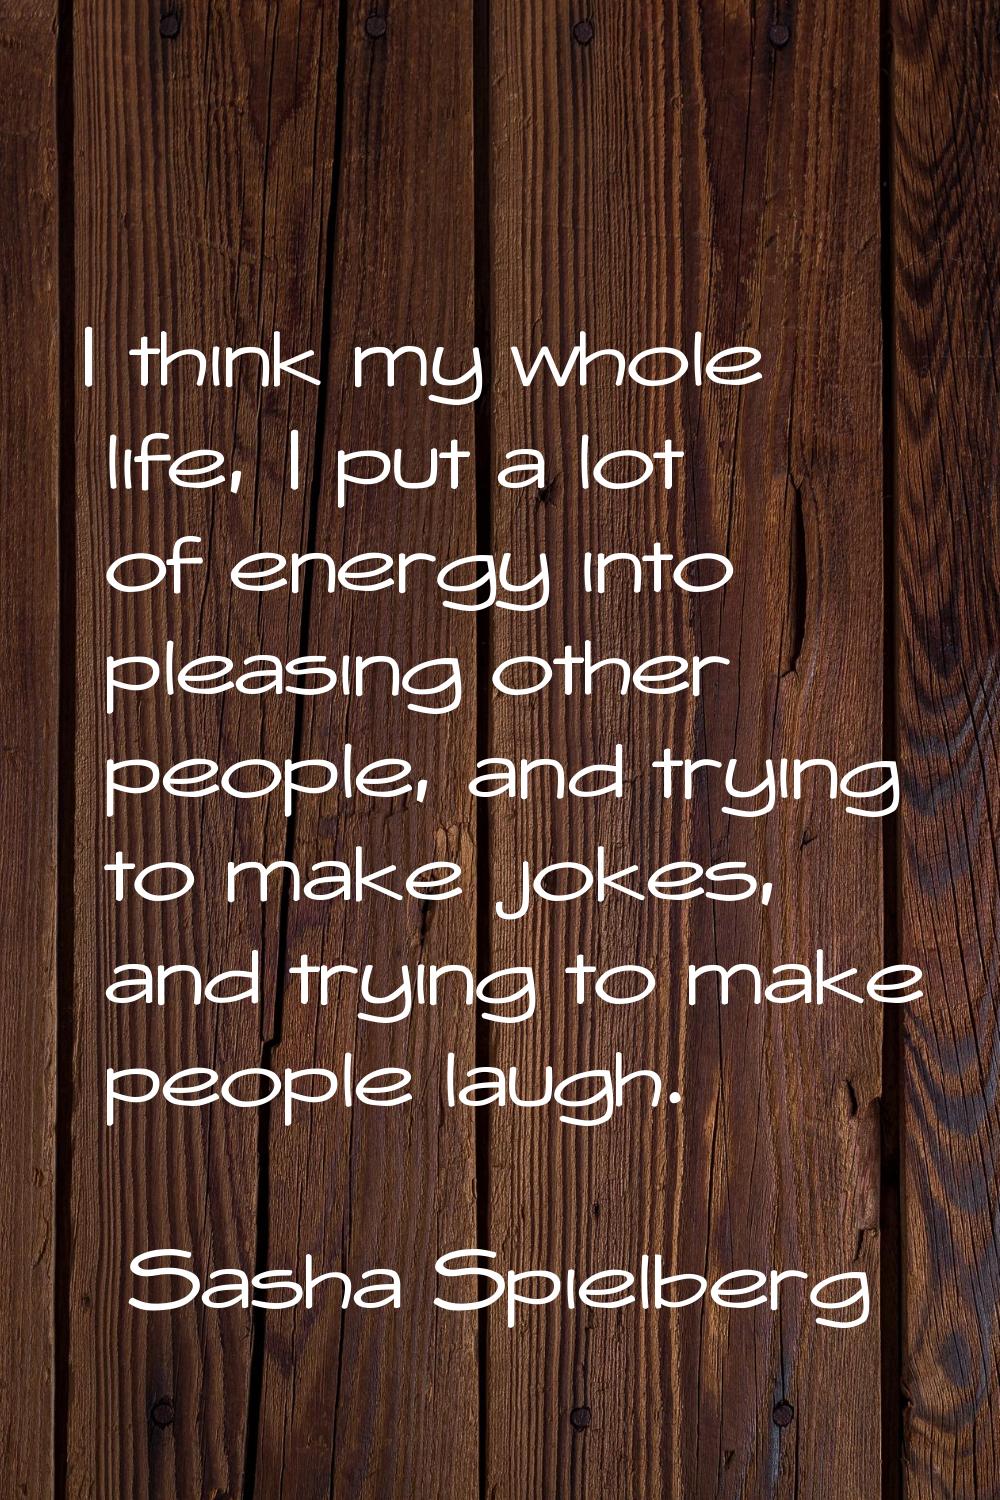 I think my whole life, I put a lot of energy into pleasing other people, and trying to make jokes, 